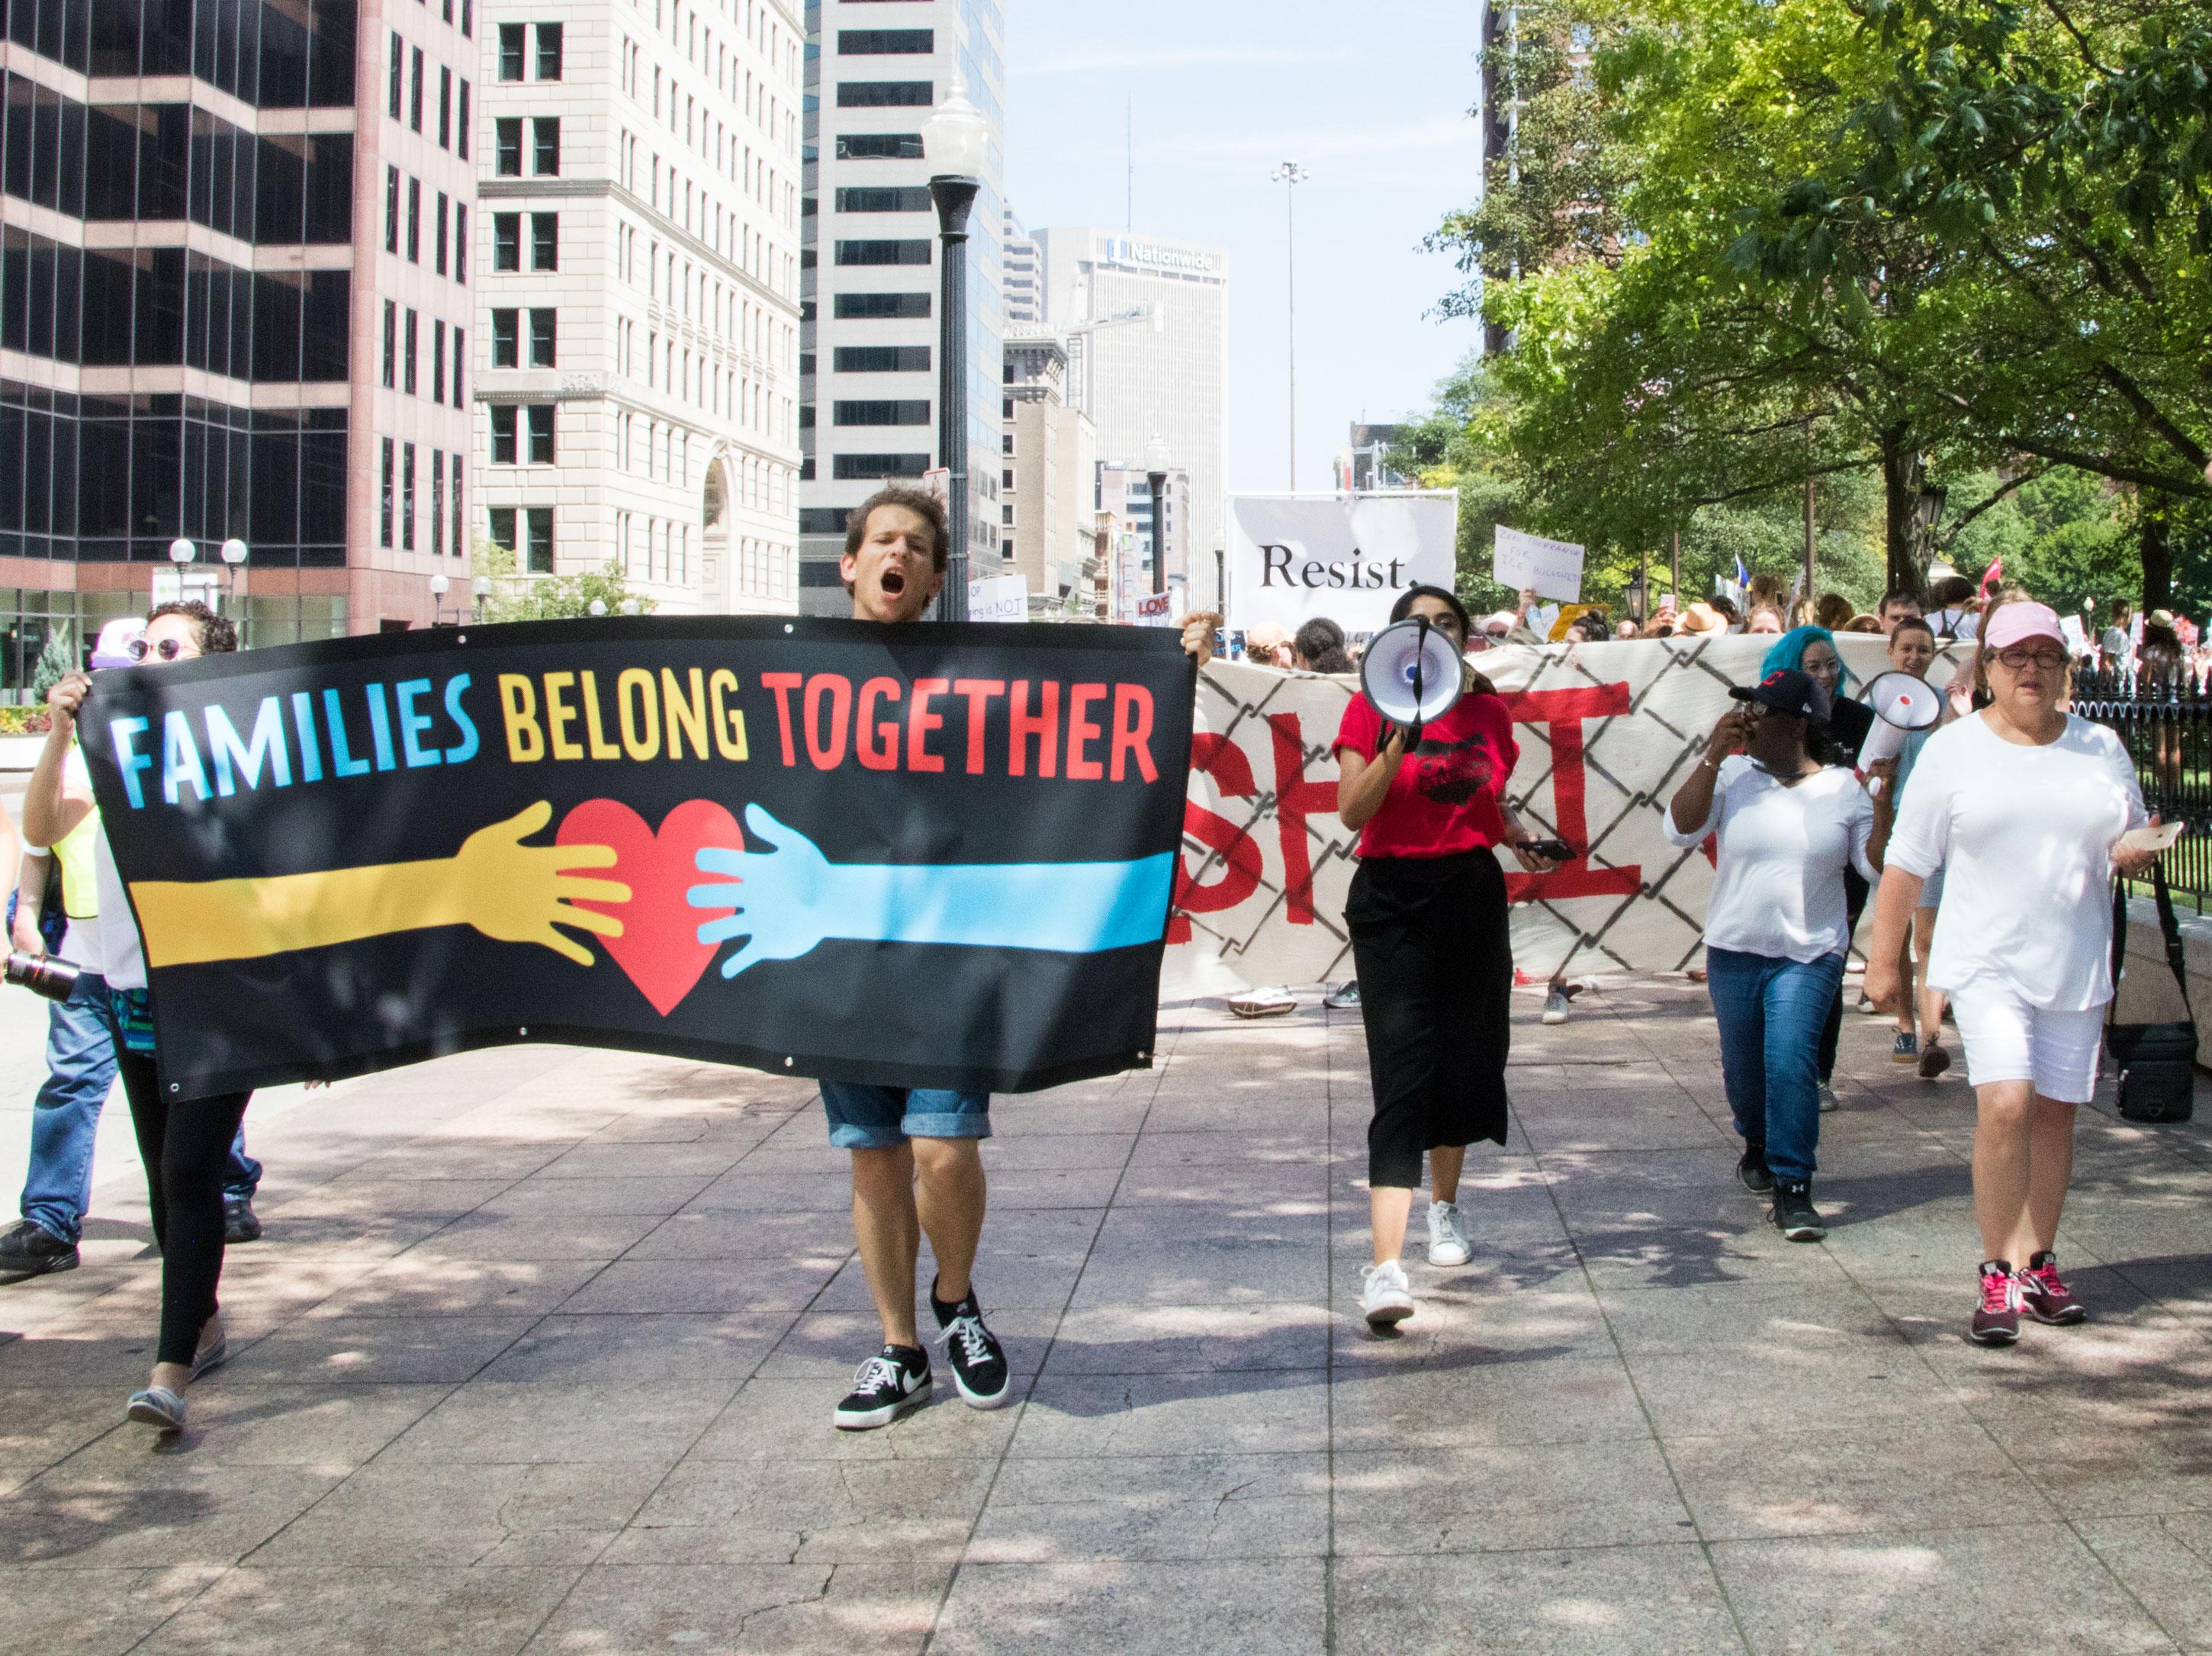 “Families Belong Together” rally and march in Ohio, June 30, 2018.